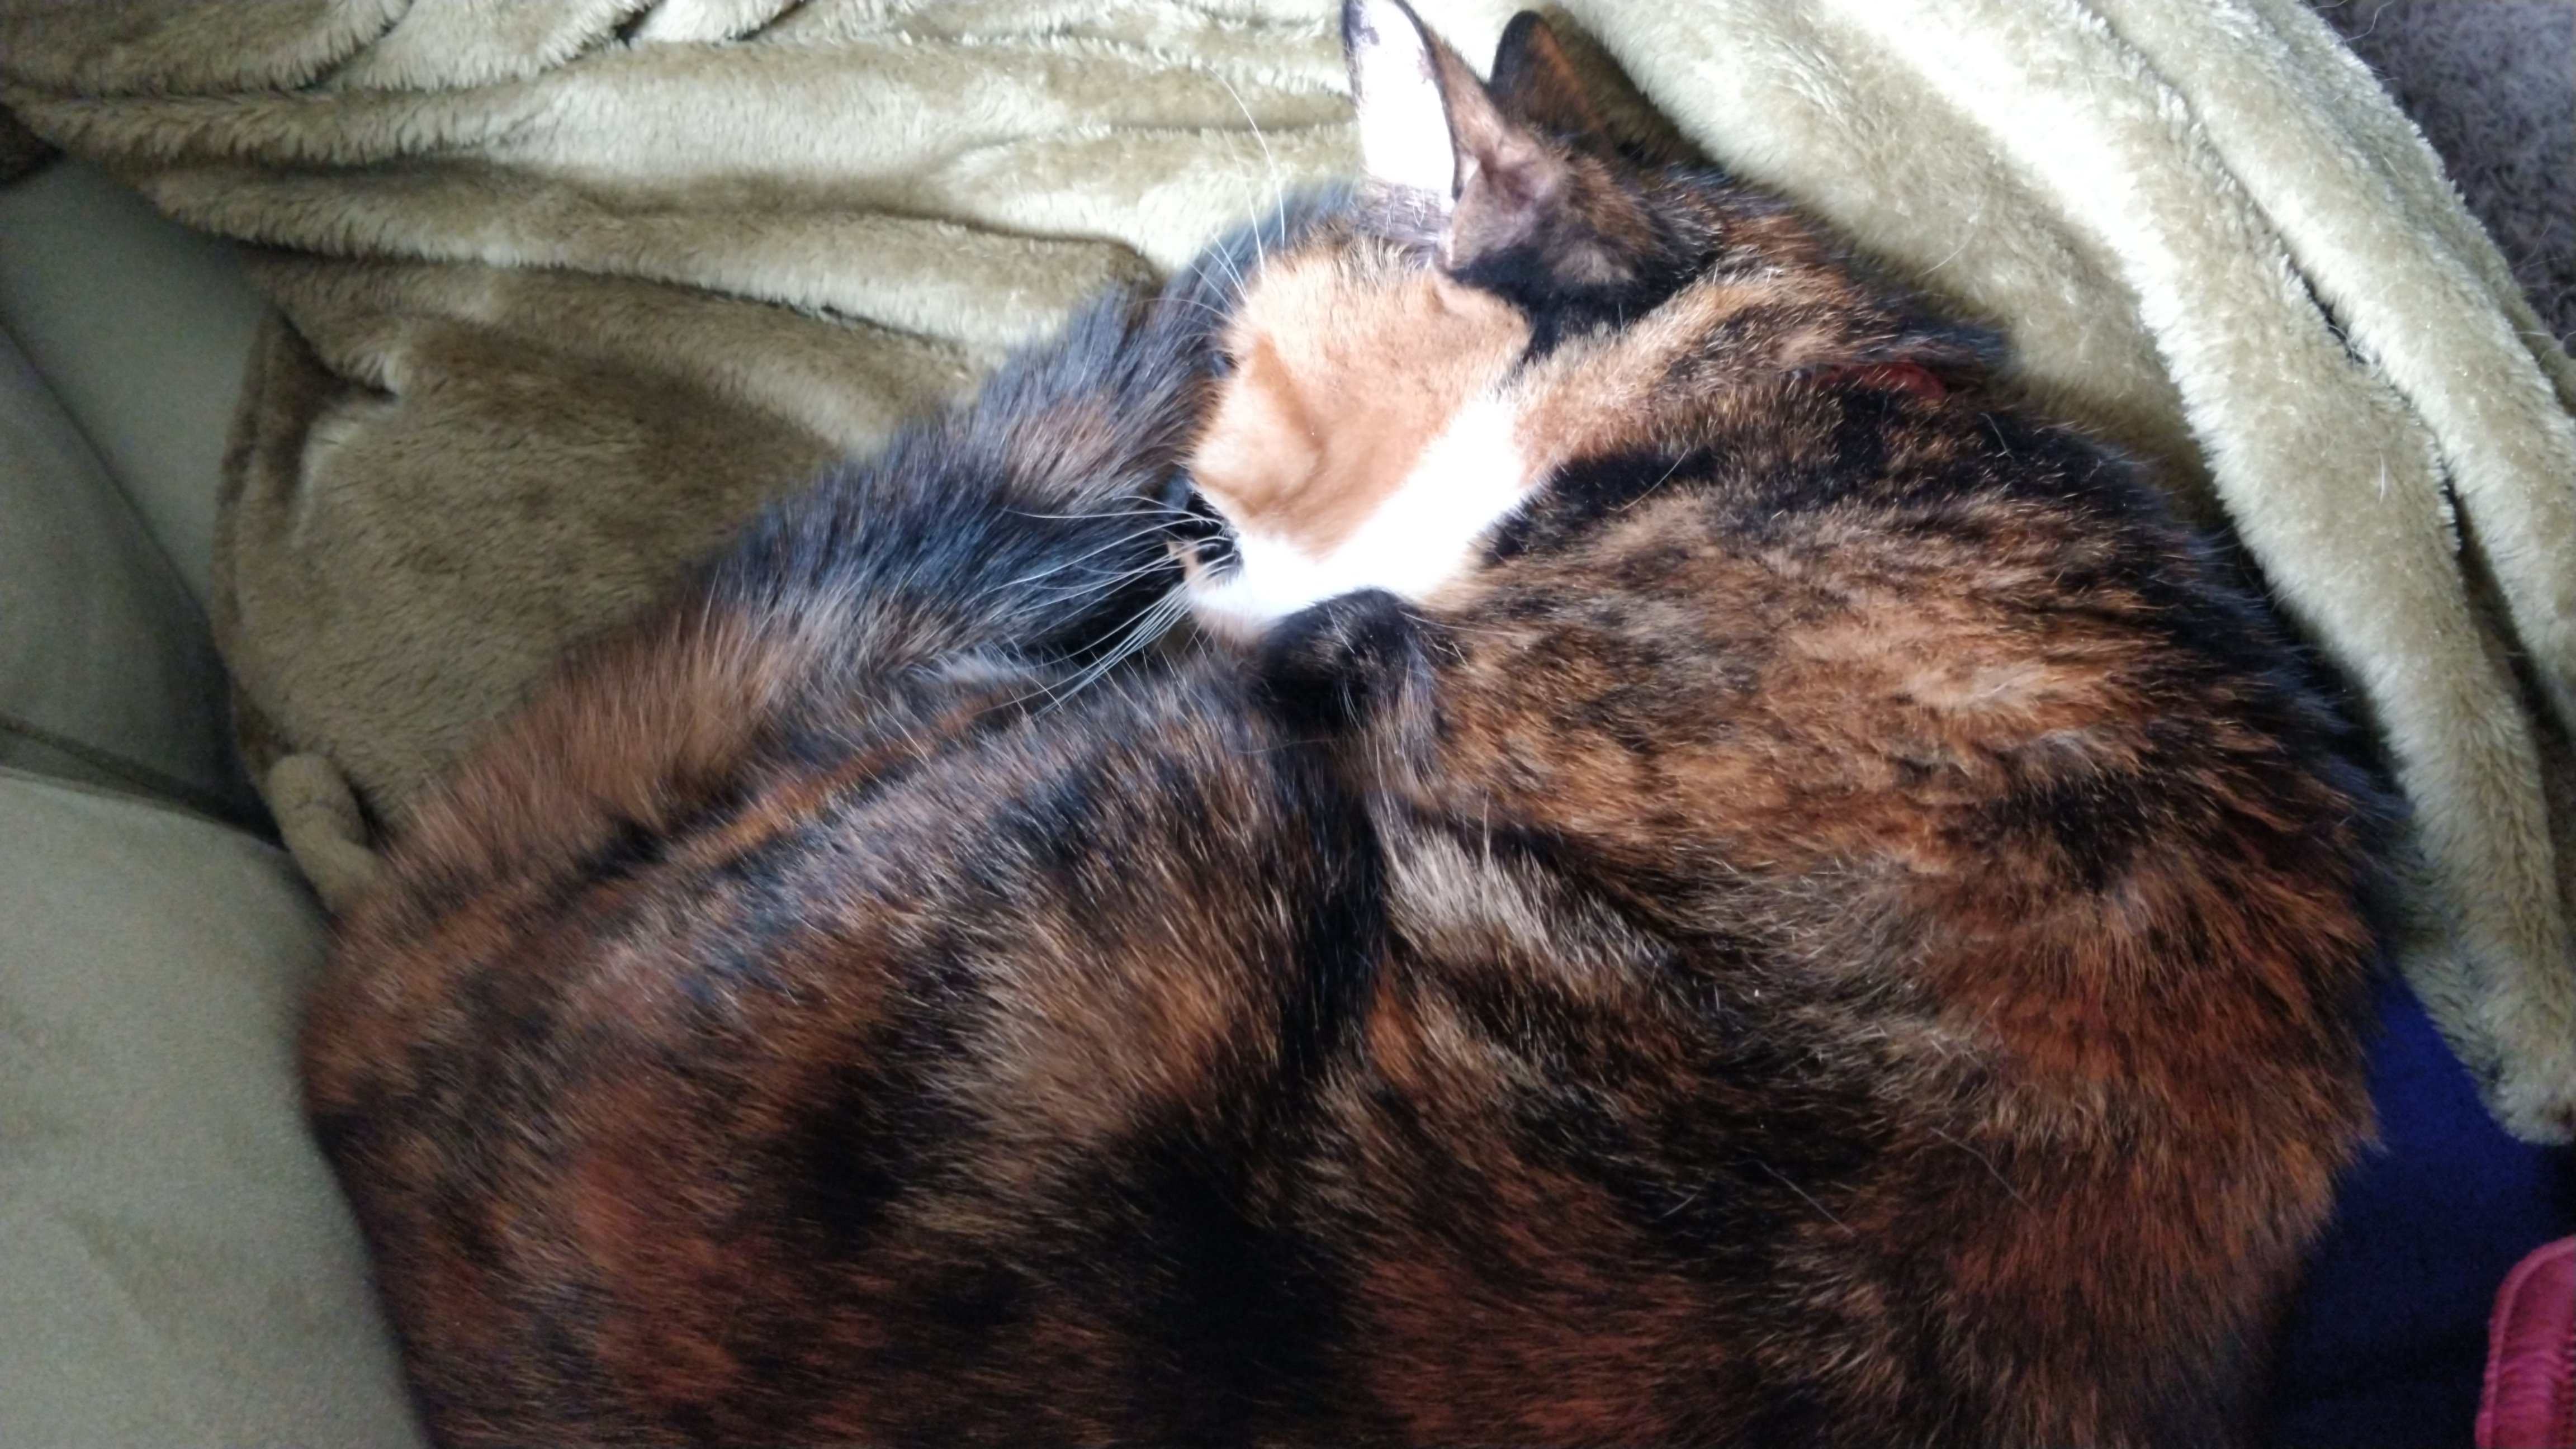 curled up calico cat on lap